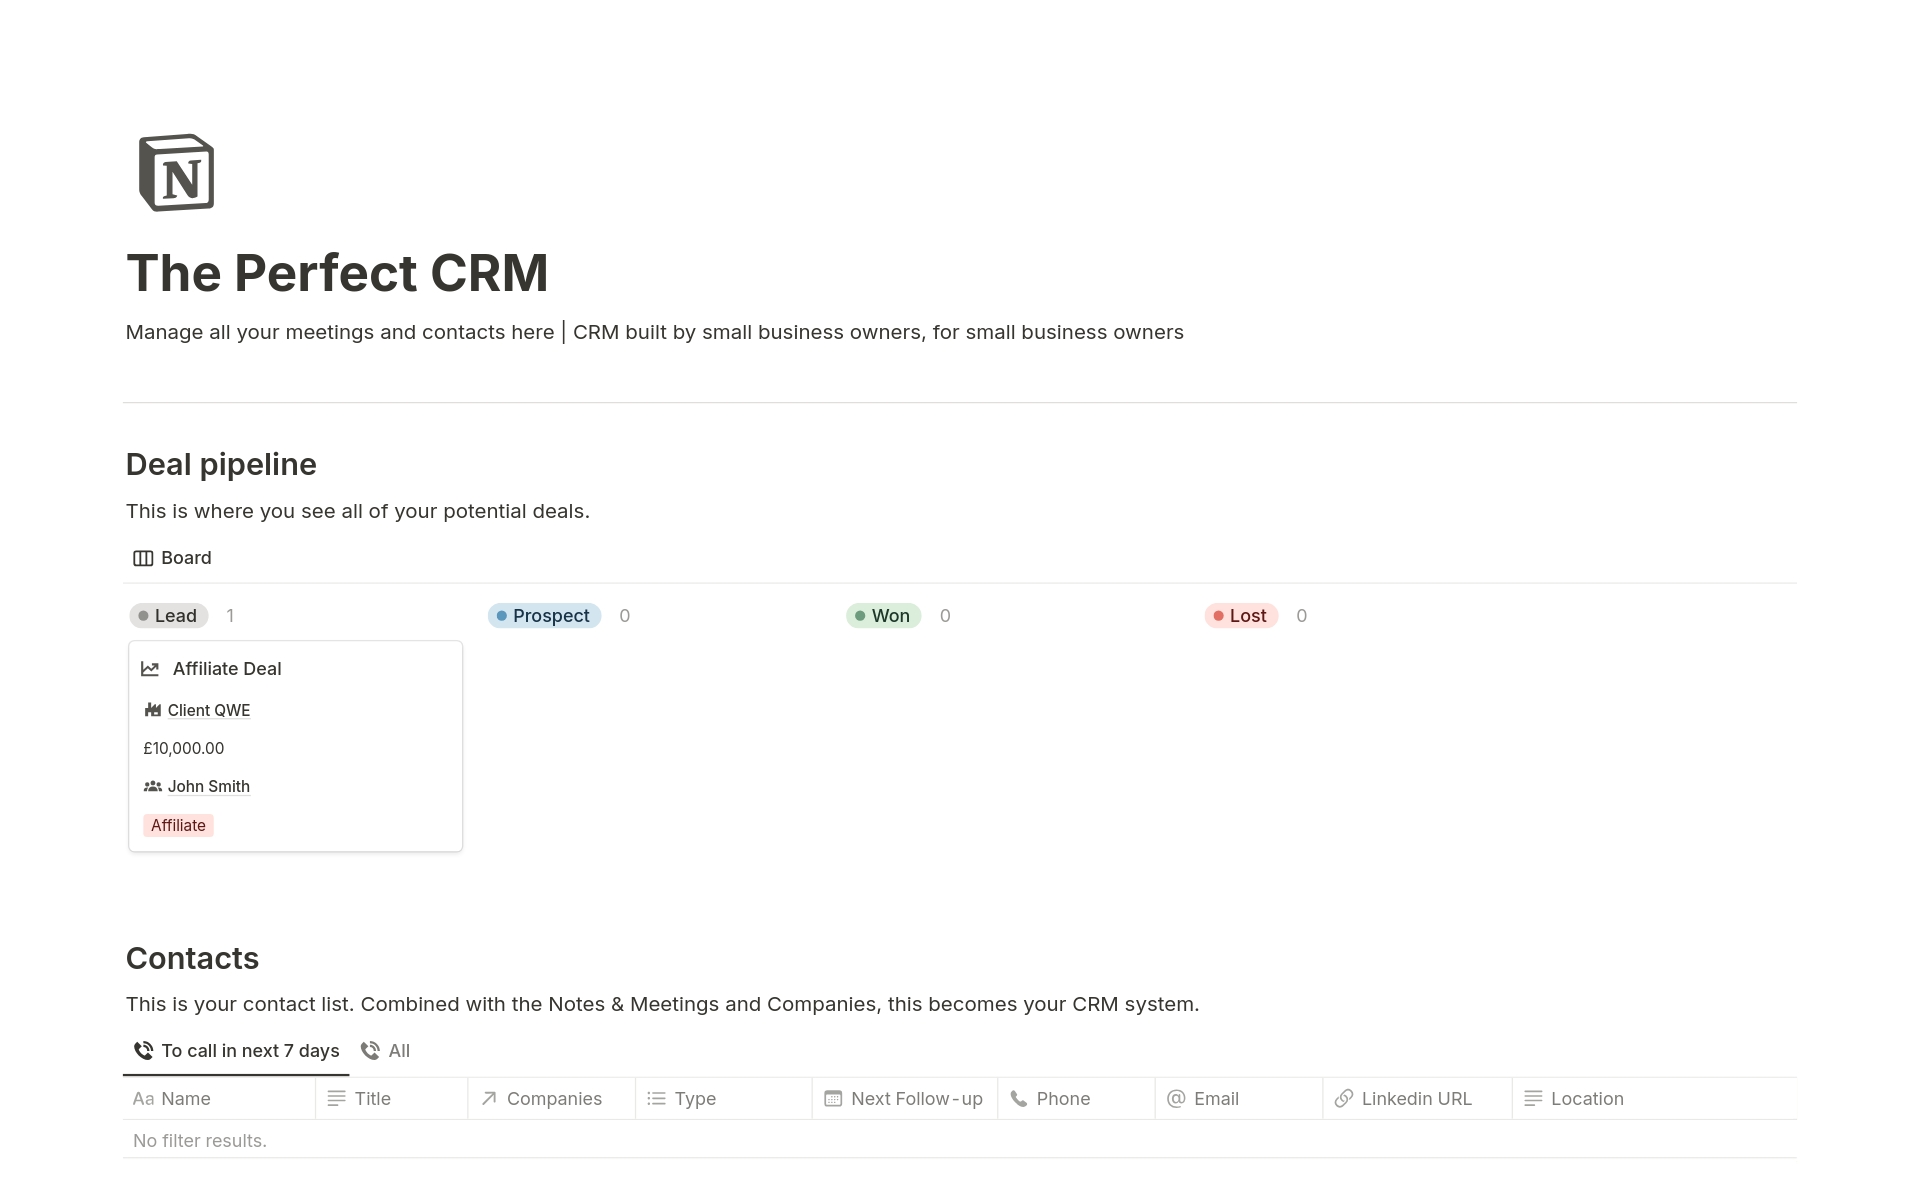 Manage all your meetings and contacts here | CRM tool built by small business owners, for small business owners 